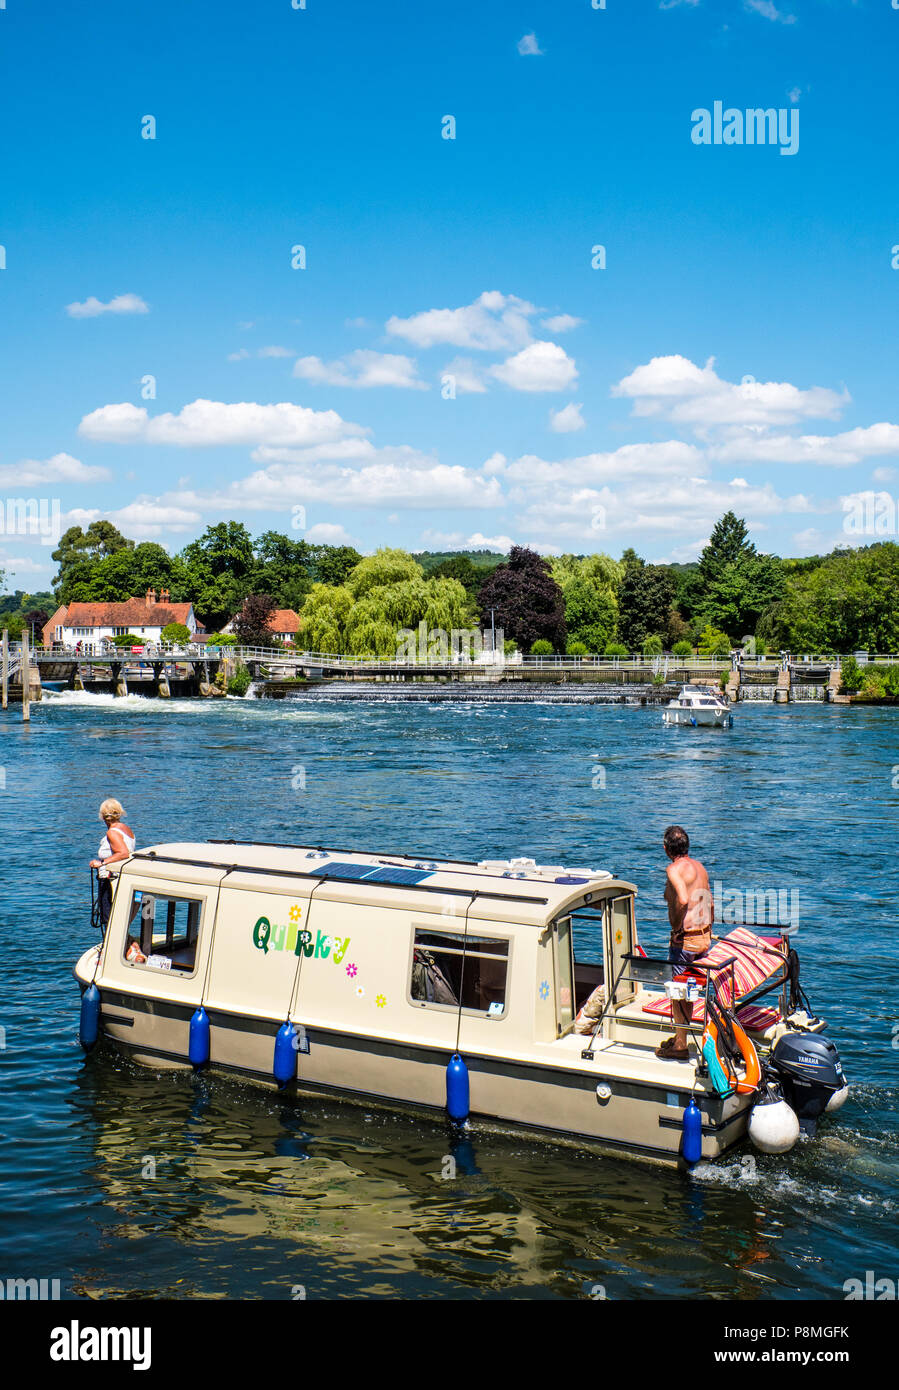 Quirky Boat, Hambleden Lock and Weir, River Thames, Berkshire, England, UK, GB. Stock Photo